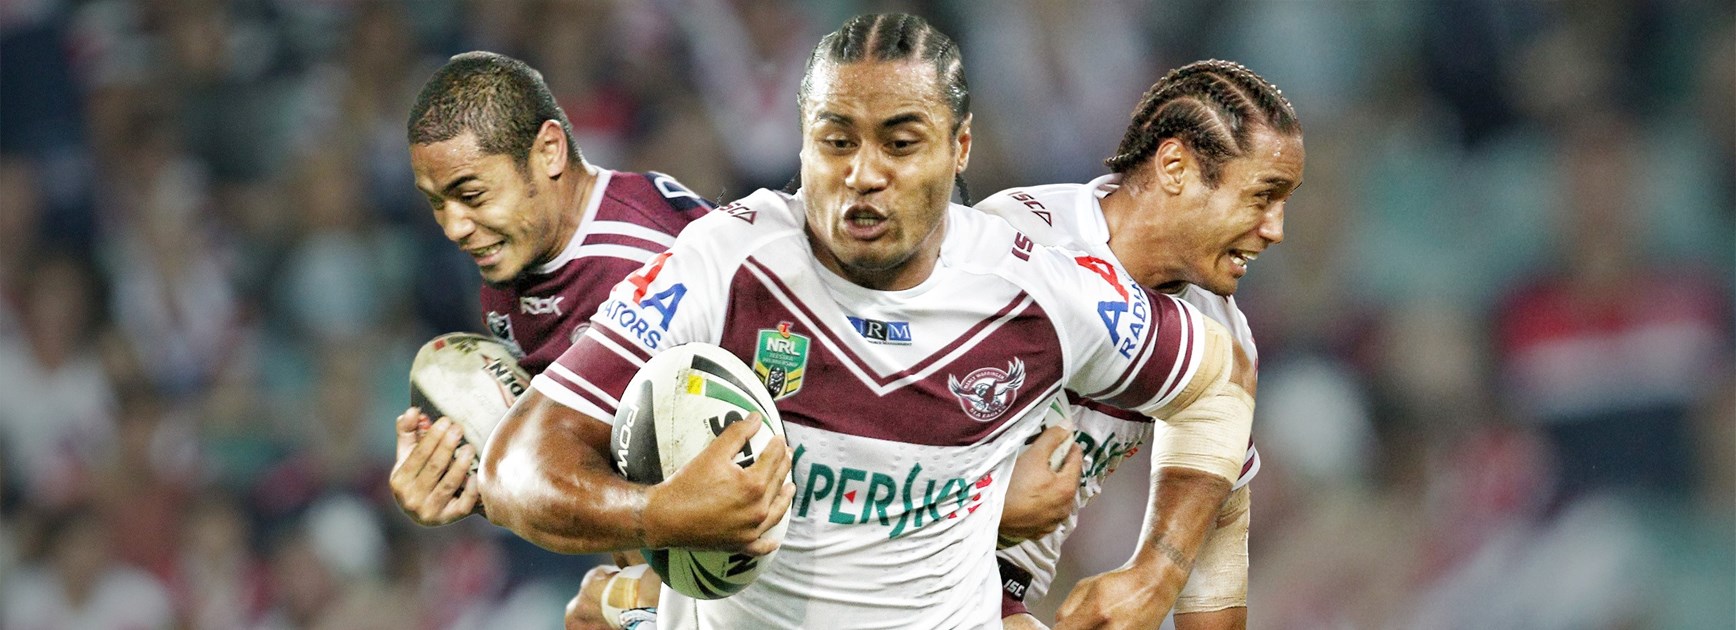 Matai crowned as game's hardest hitter